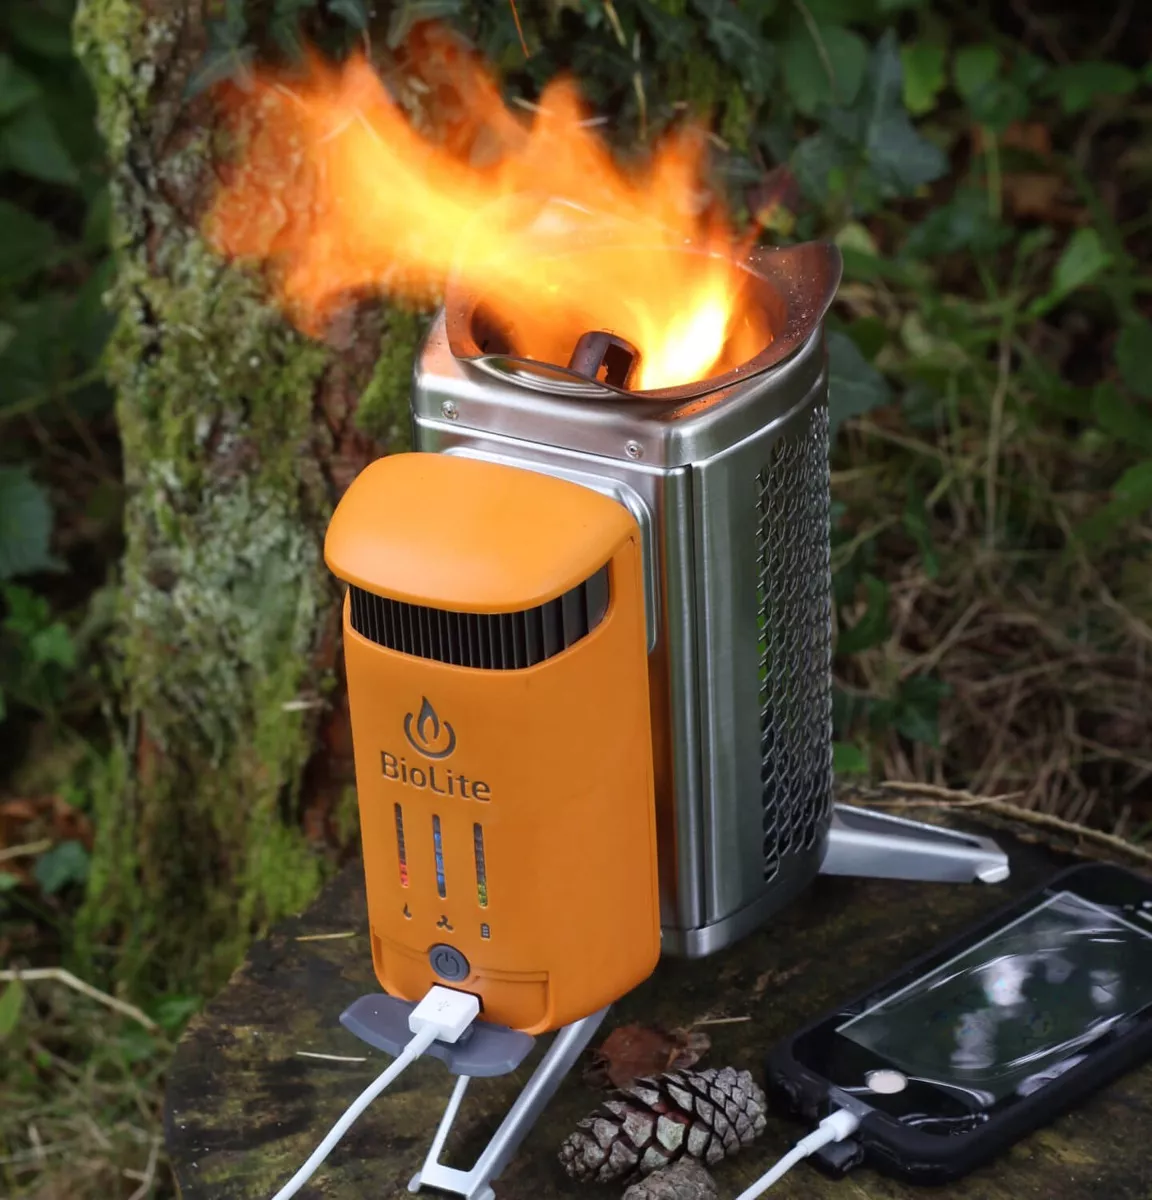 Biolite camping stove with battery charging